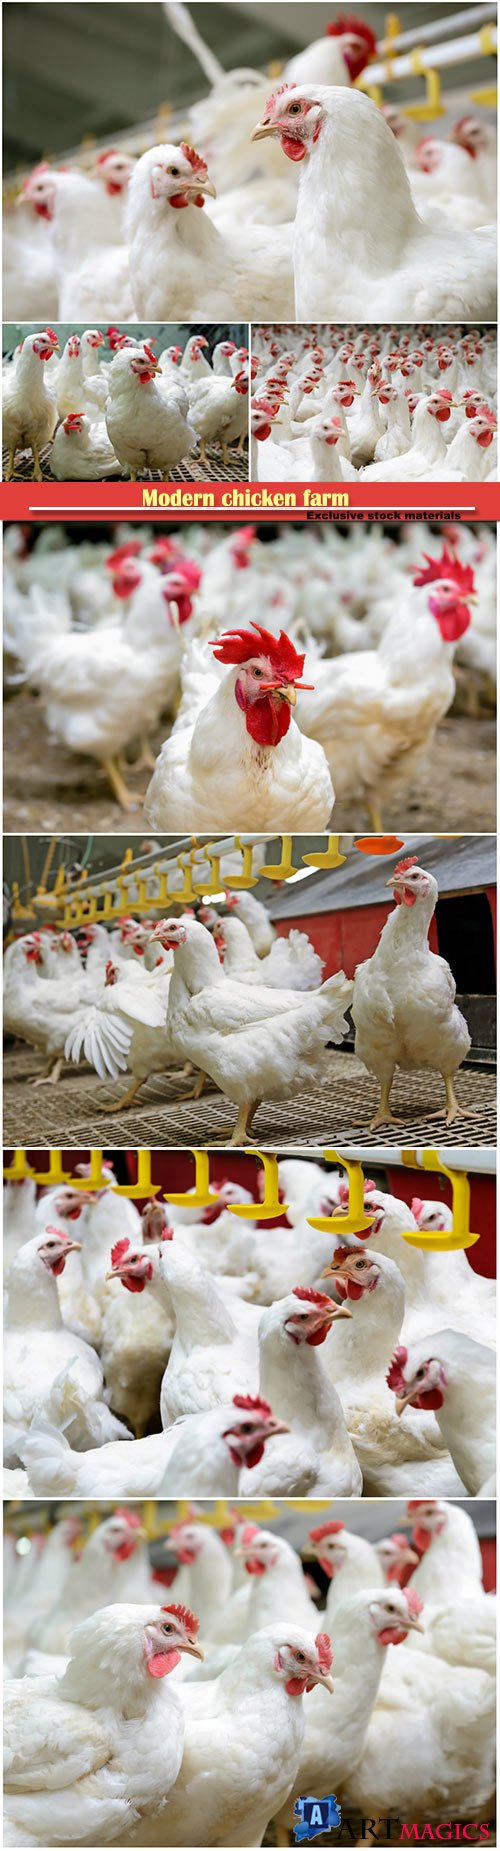 Modern chicken farm, production of white meat